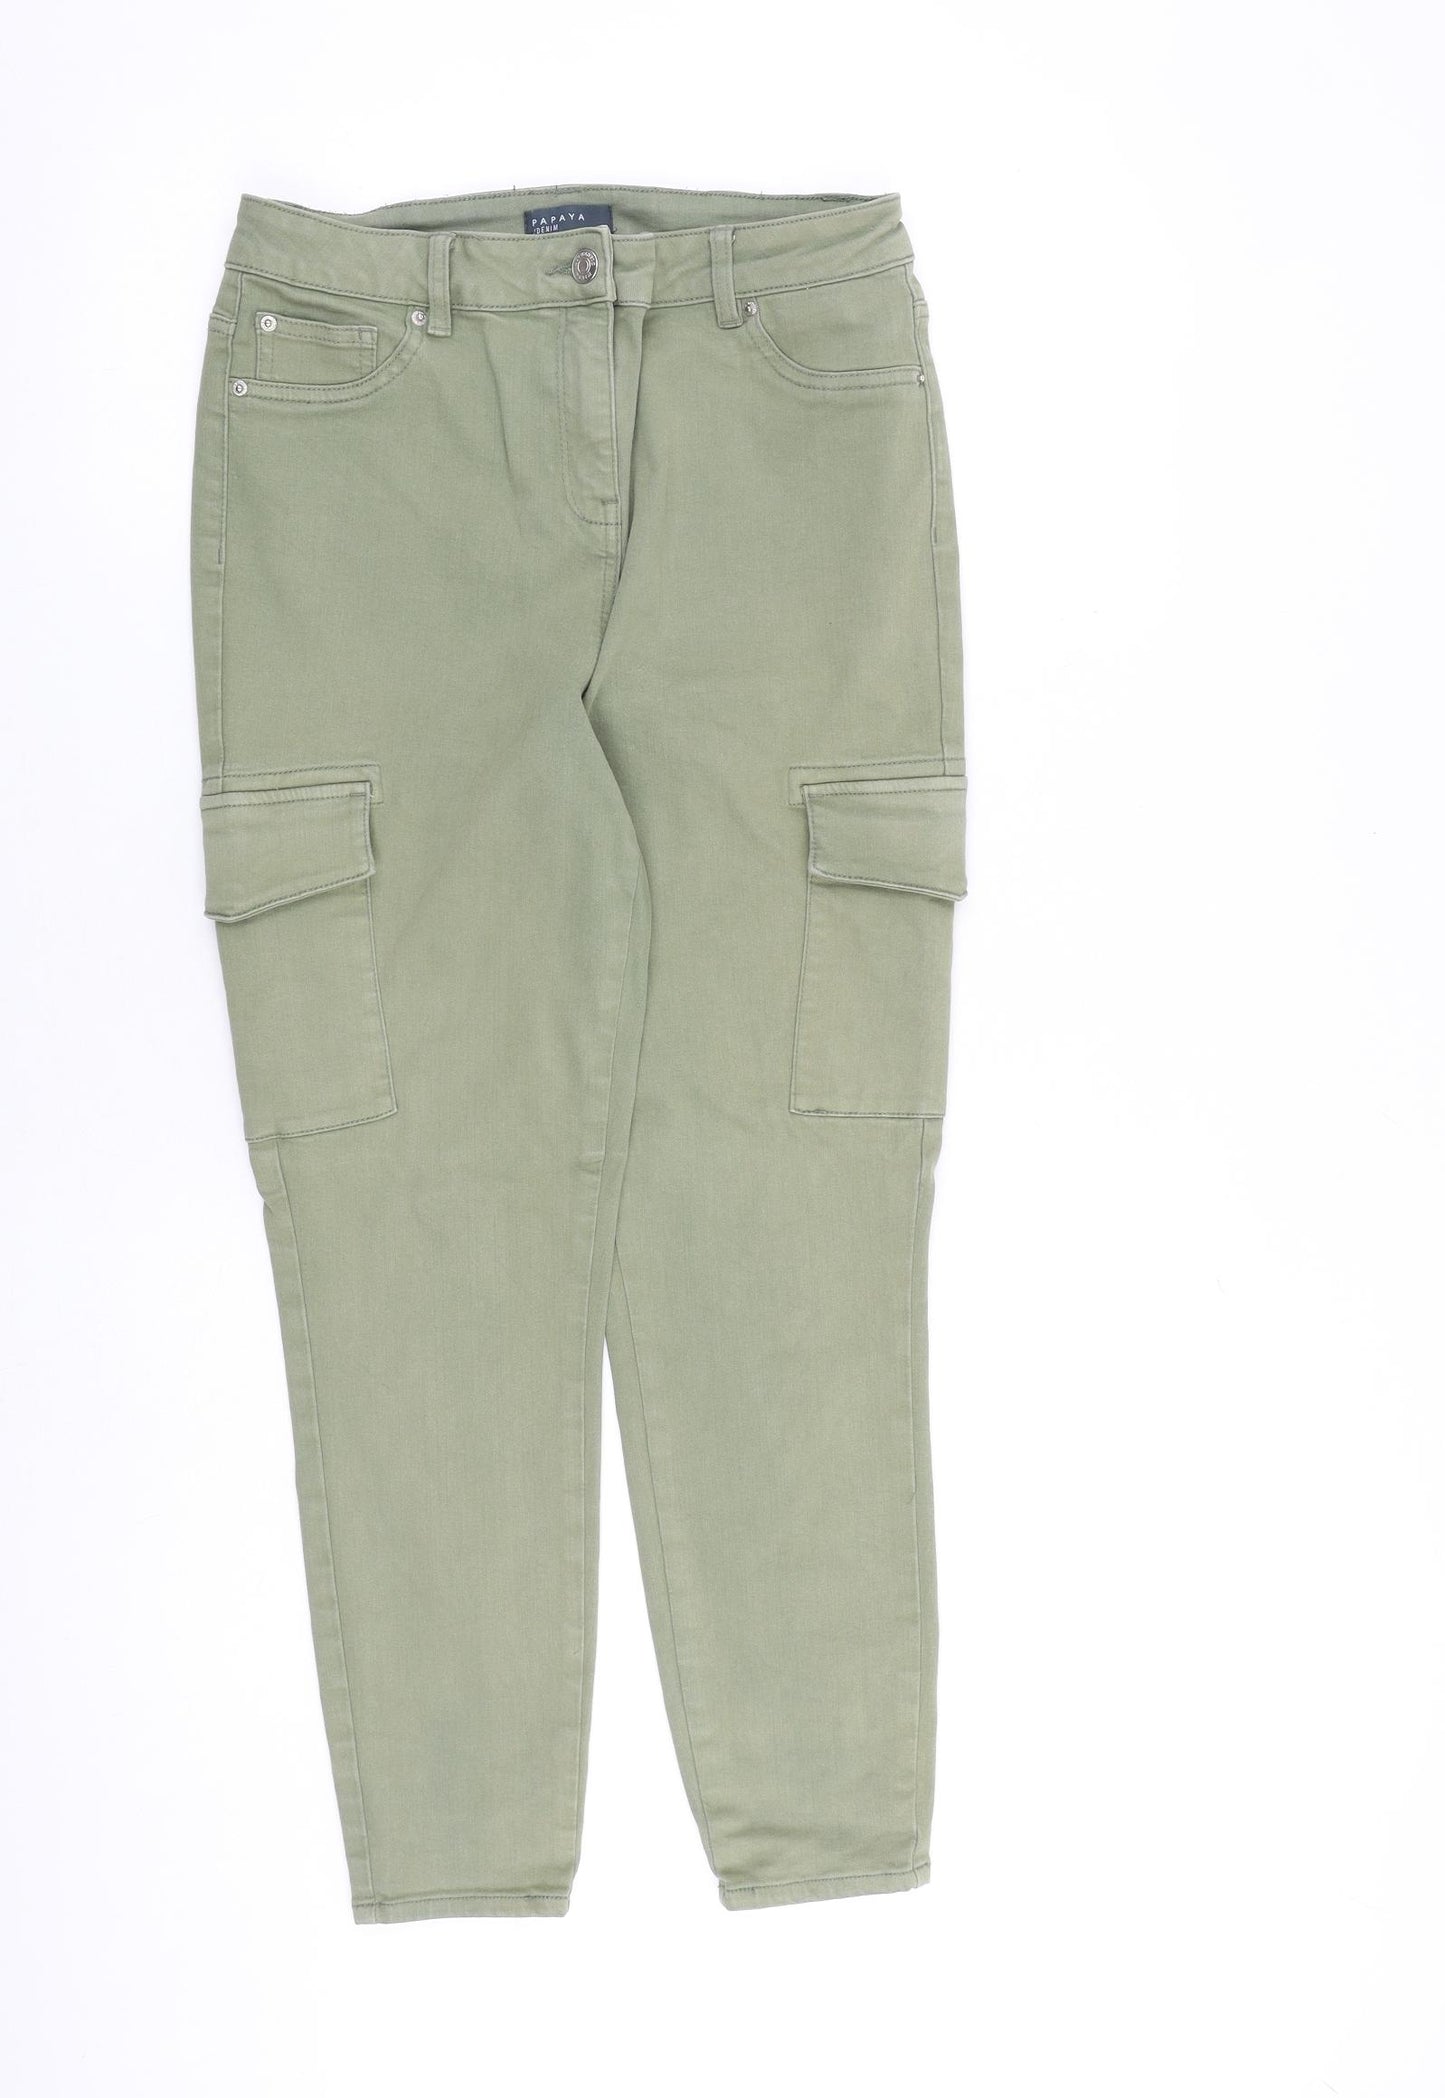 Papaya Womens Green Cotton Tapered Jeans Size 12 L26 in Regular Zip - Cargo